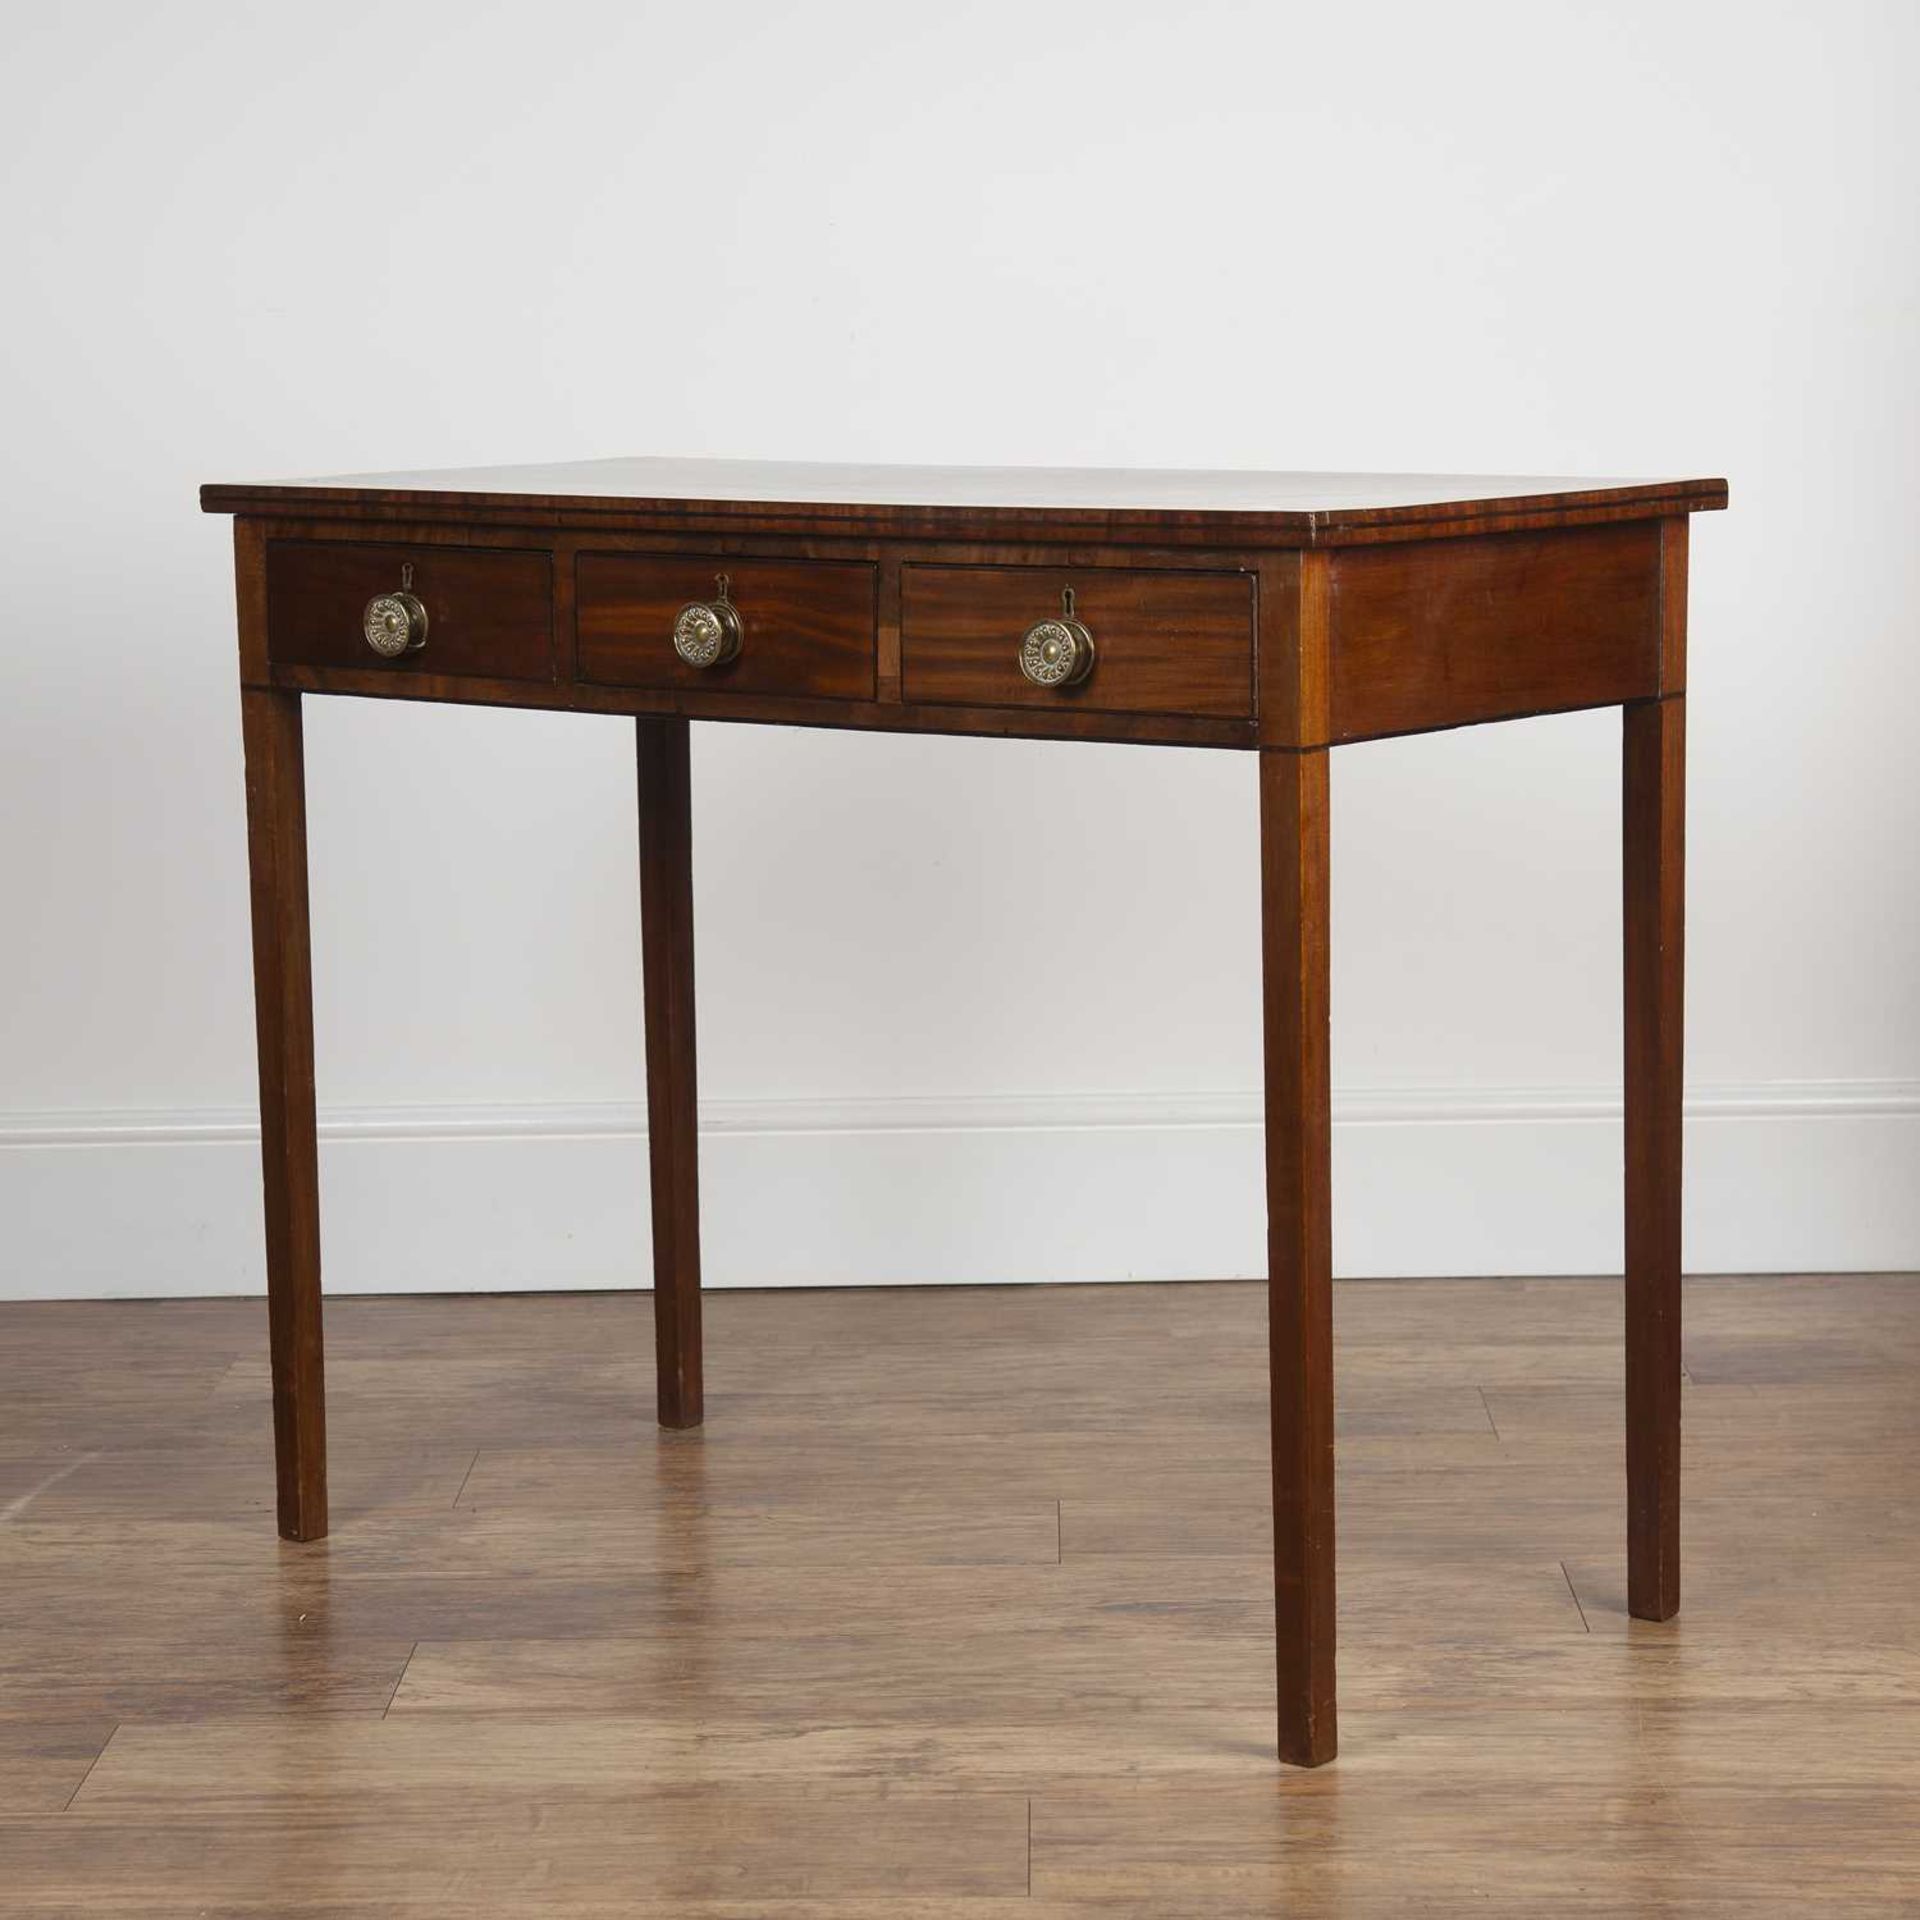 Mahogany side table 19th Century, fitted with three frieze drawers and round brass handles, standing - Image 3 of 6